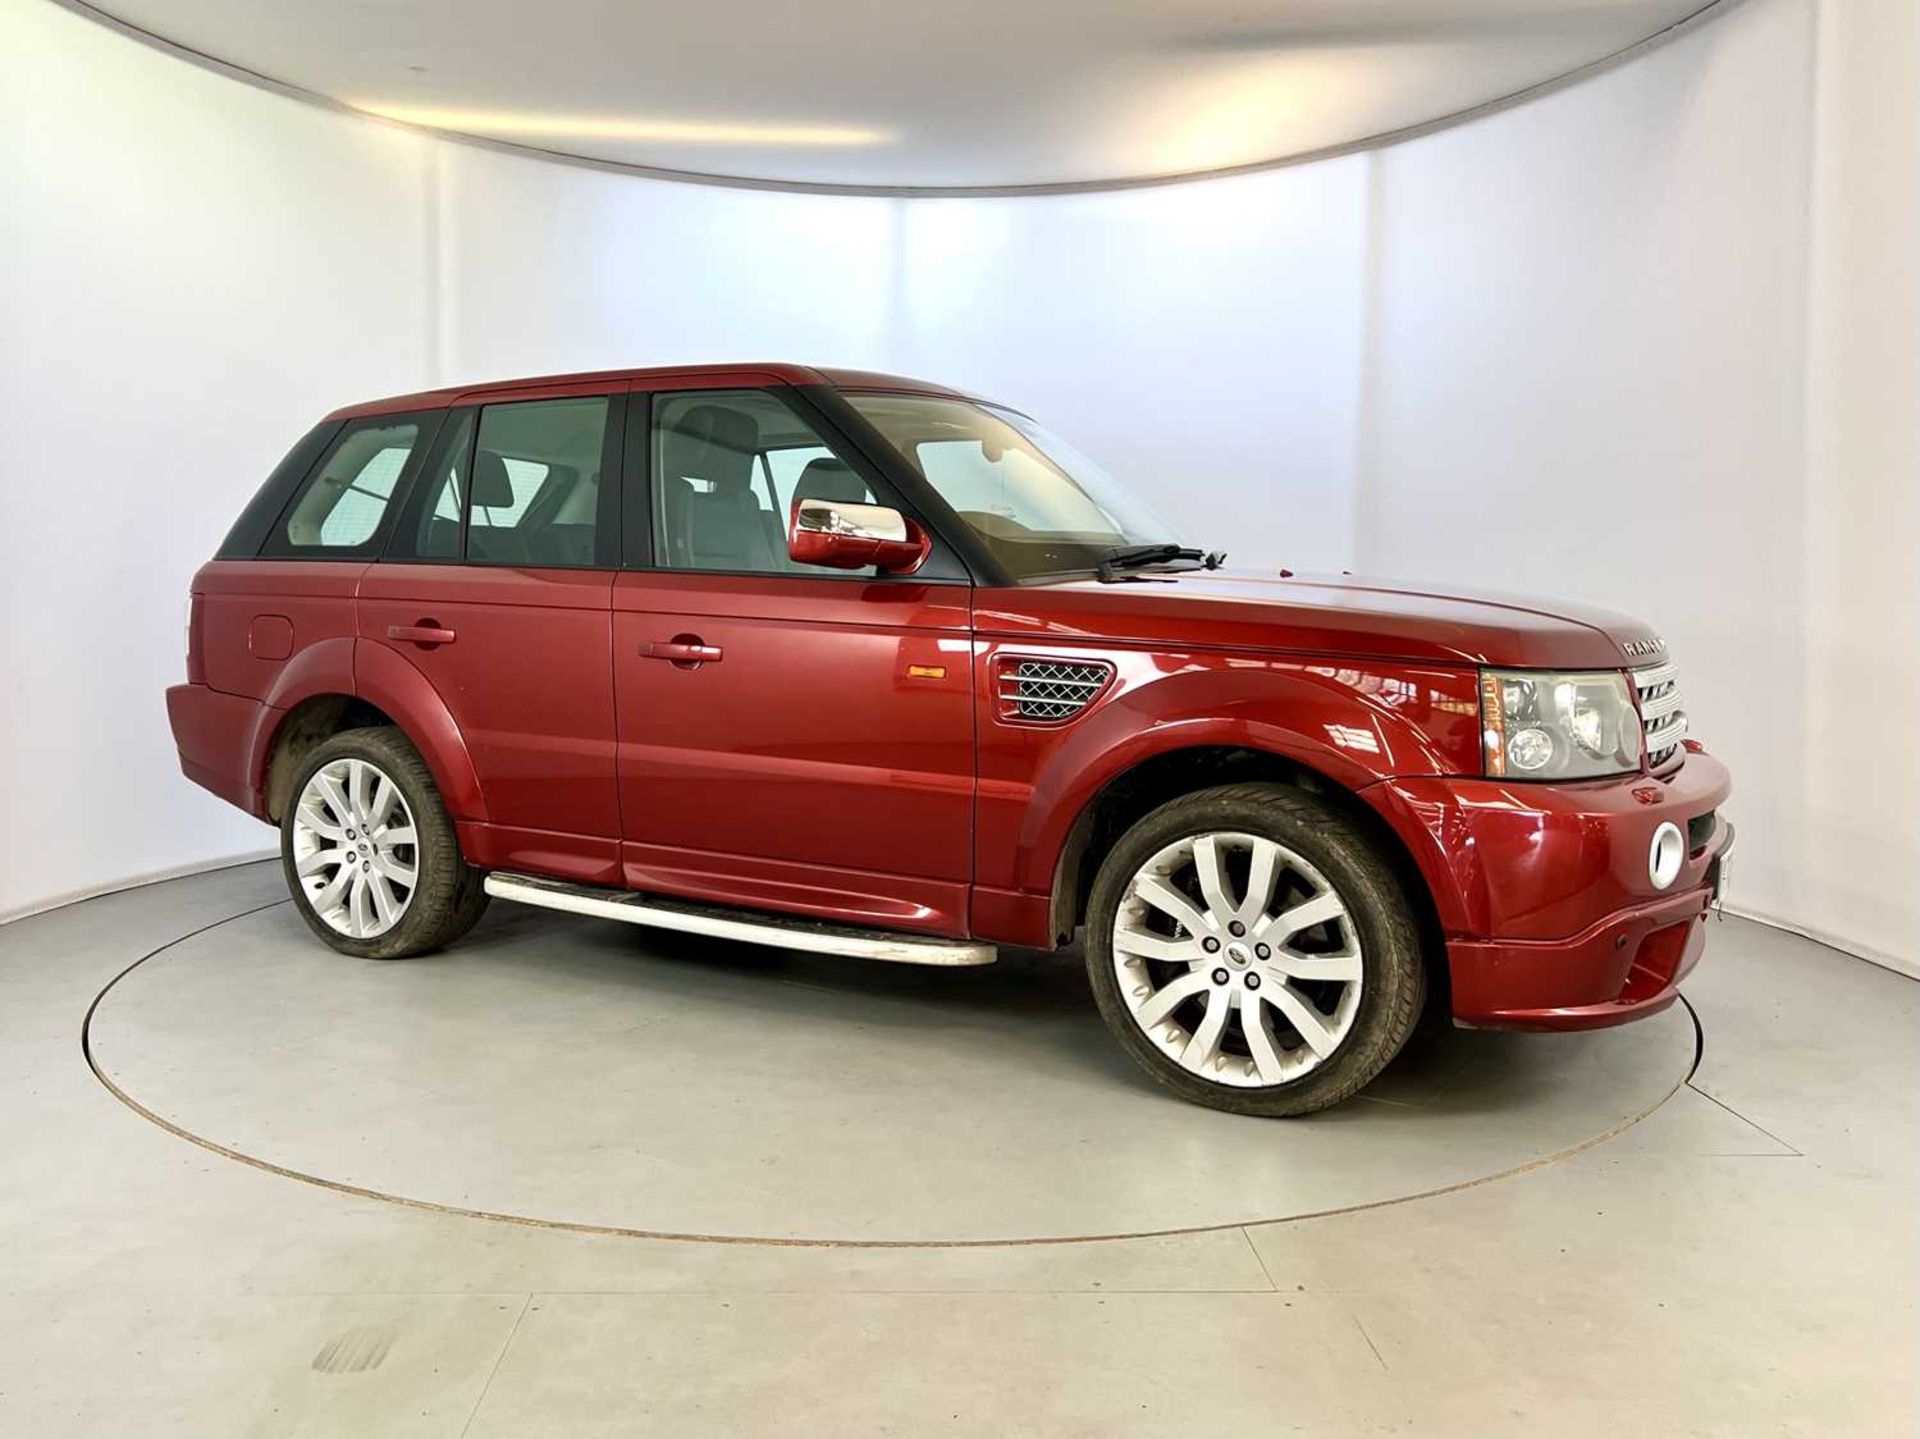 2006 Range Rover Sport 4.2 Supercharged - Image 12 of 34